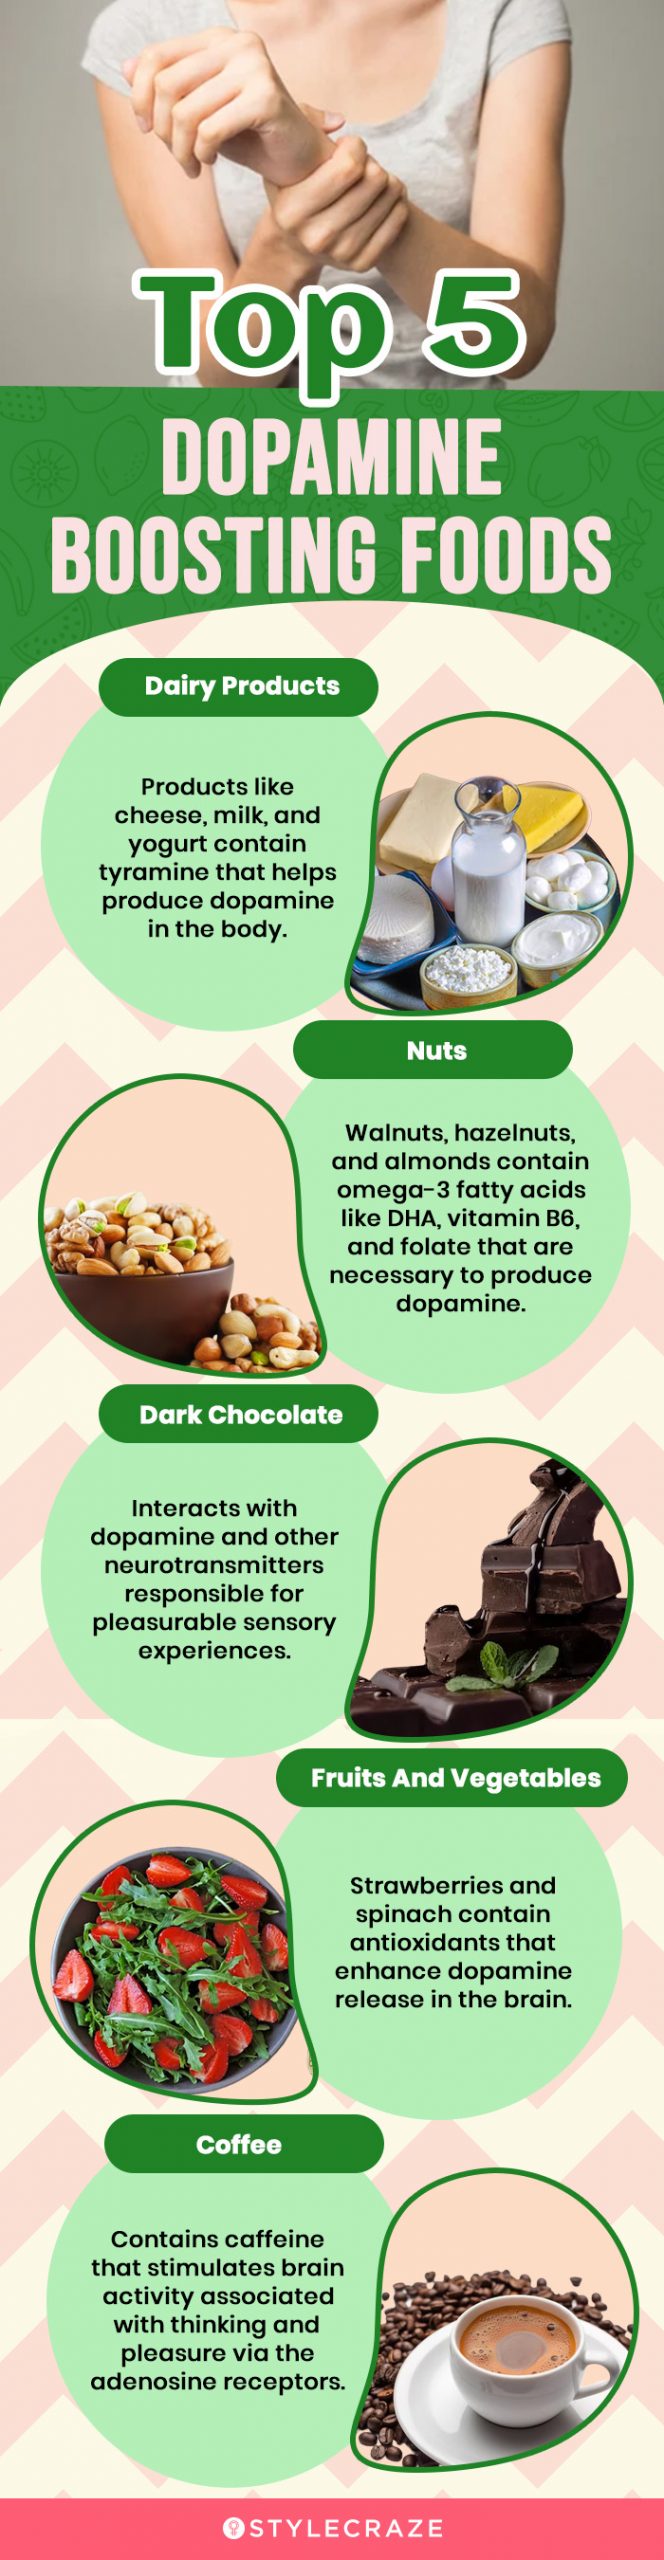 top 5 dopamine boosting foods(infographic)